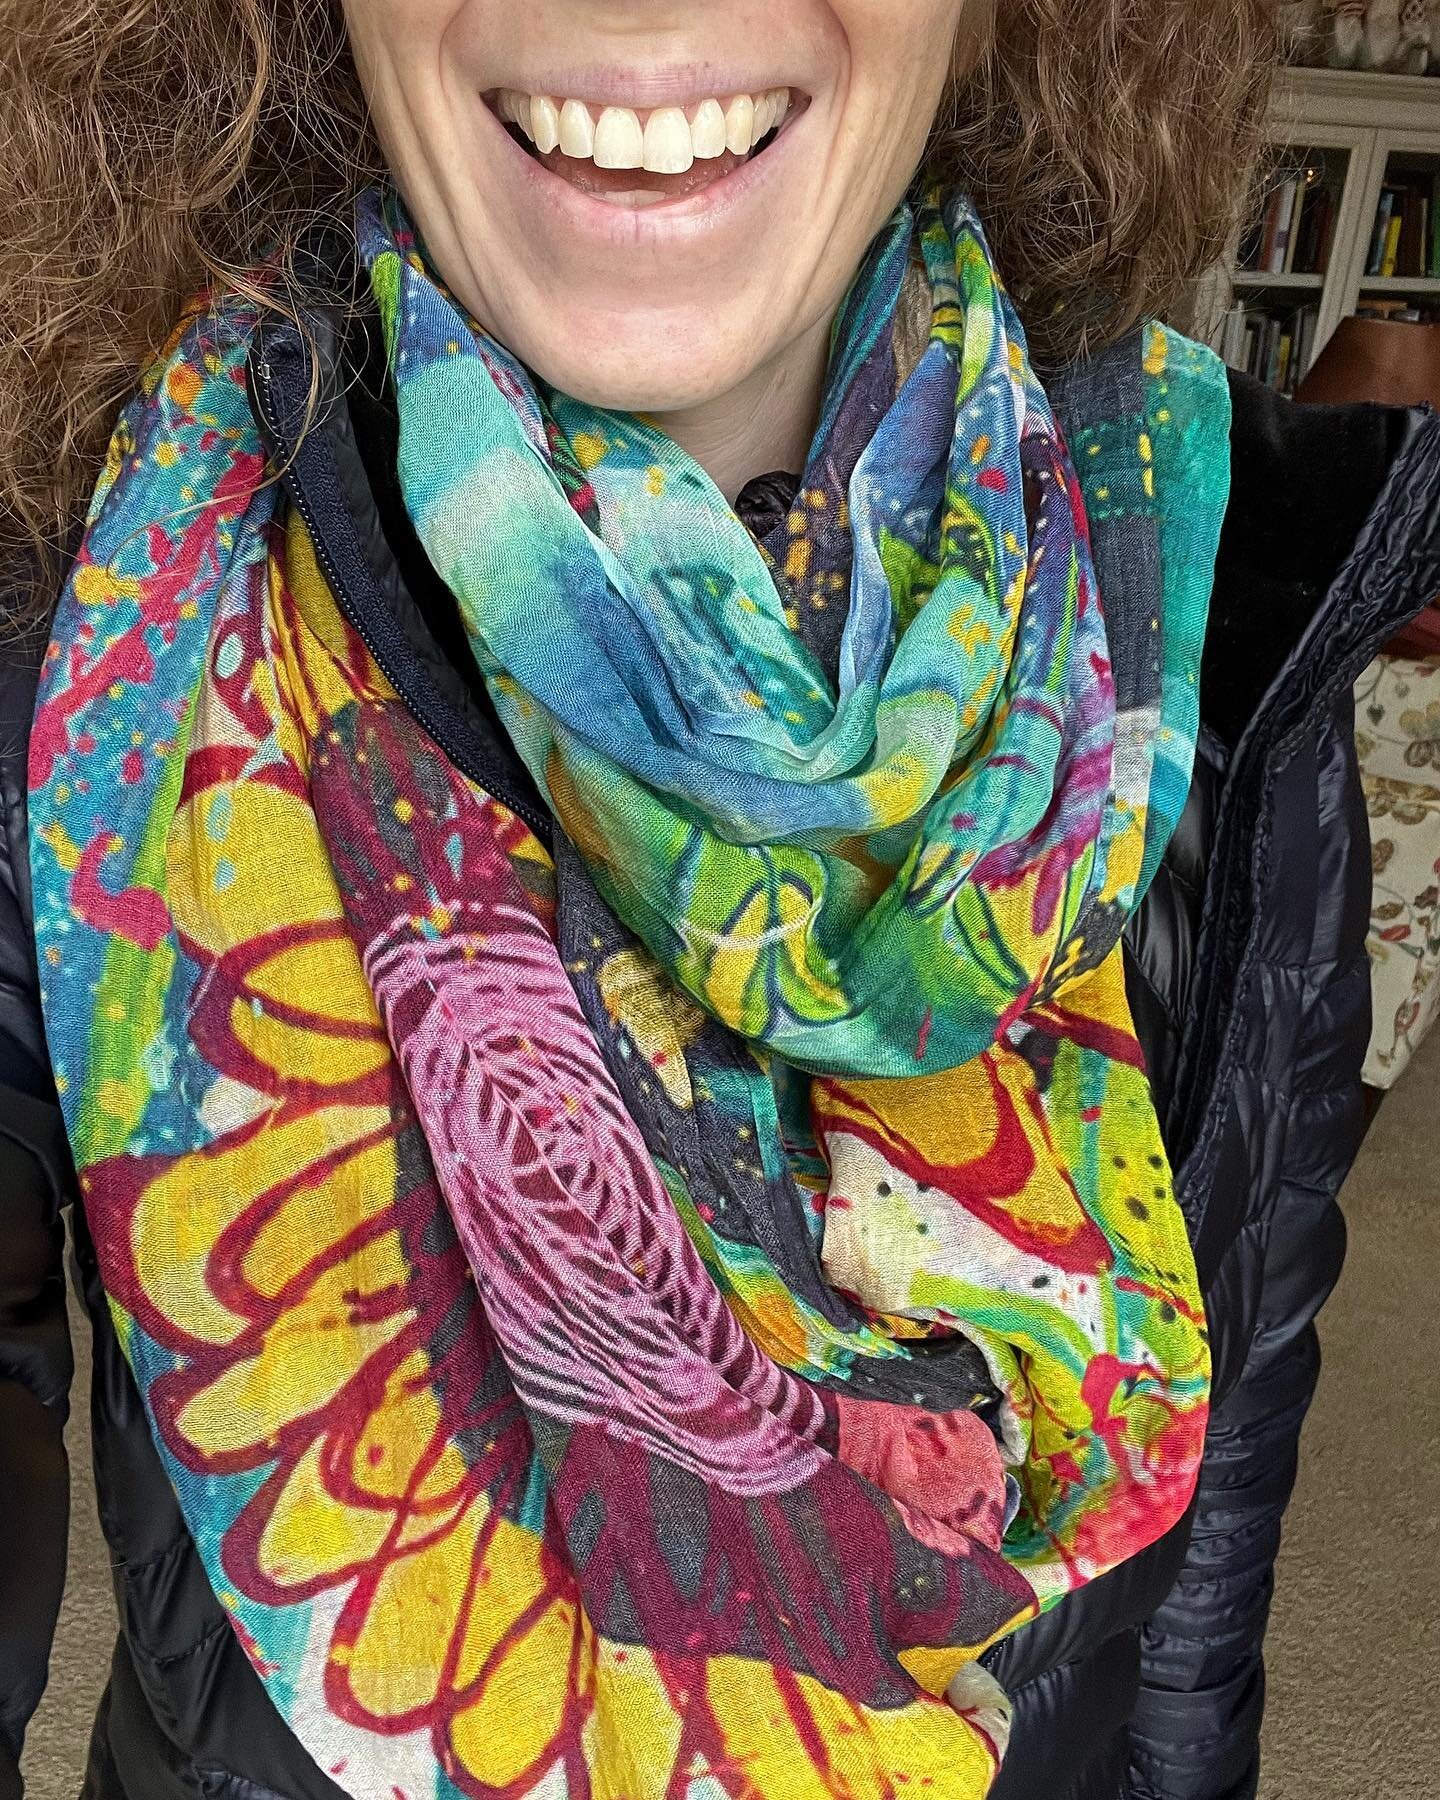 Here is a sneak peak of a new product that will soon be available on my website! 

ART SCARVES! 💖💖💖

This one is printed on modal (beechwood) fabric. It is soft and silky and the perfect size! 

The company that I am partnering with has social imp